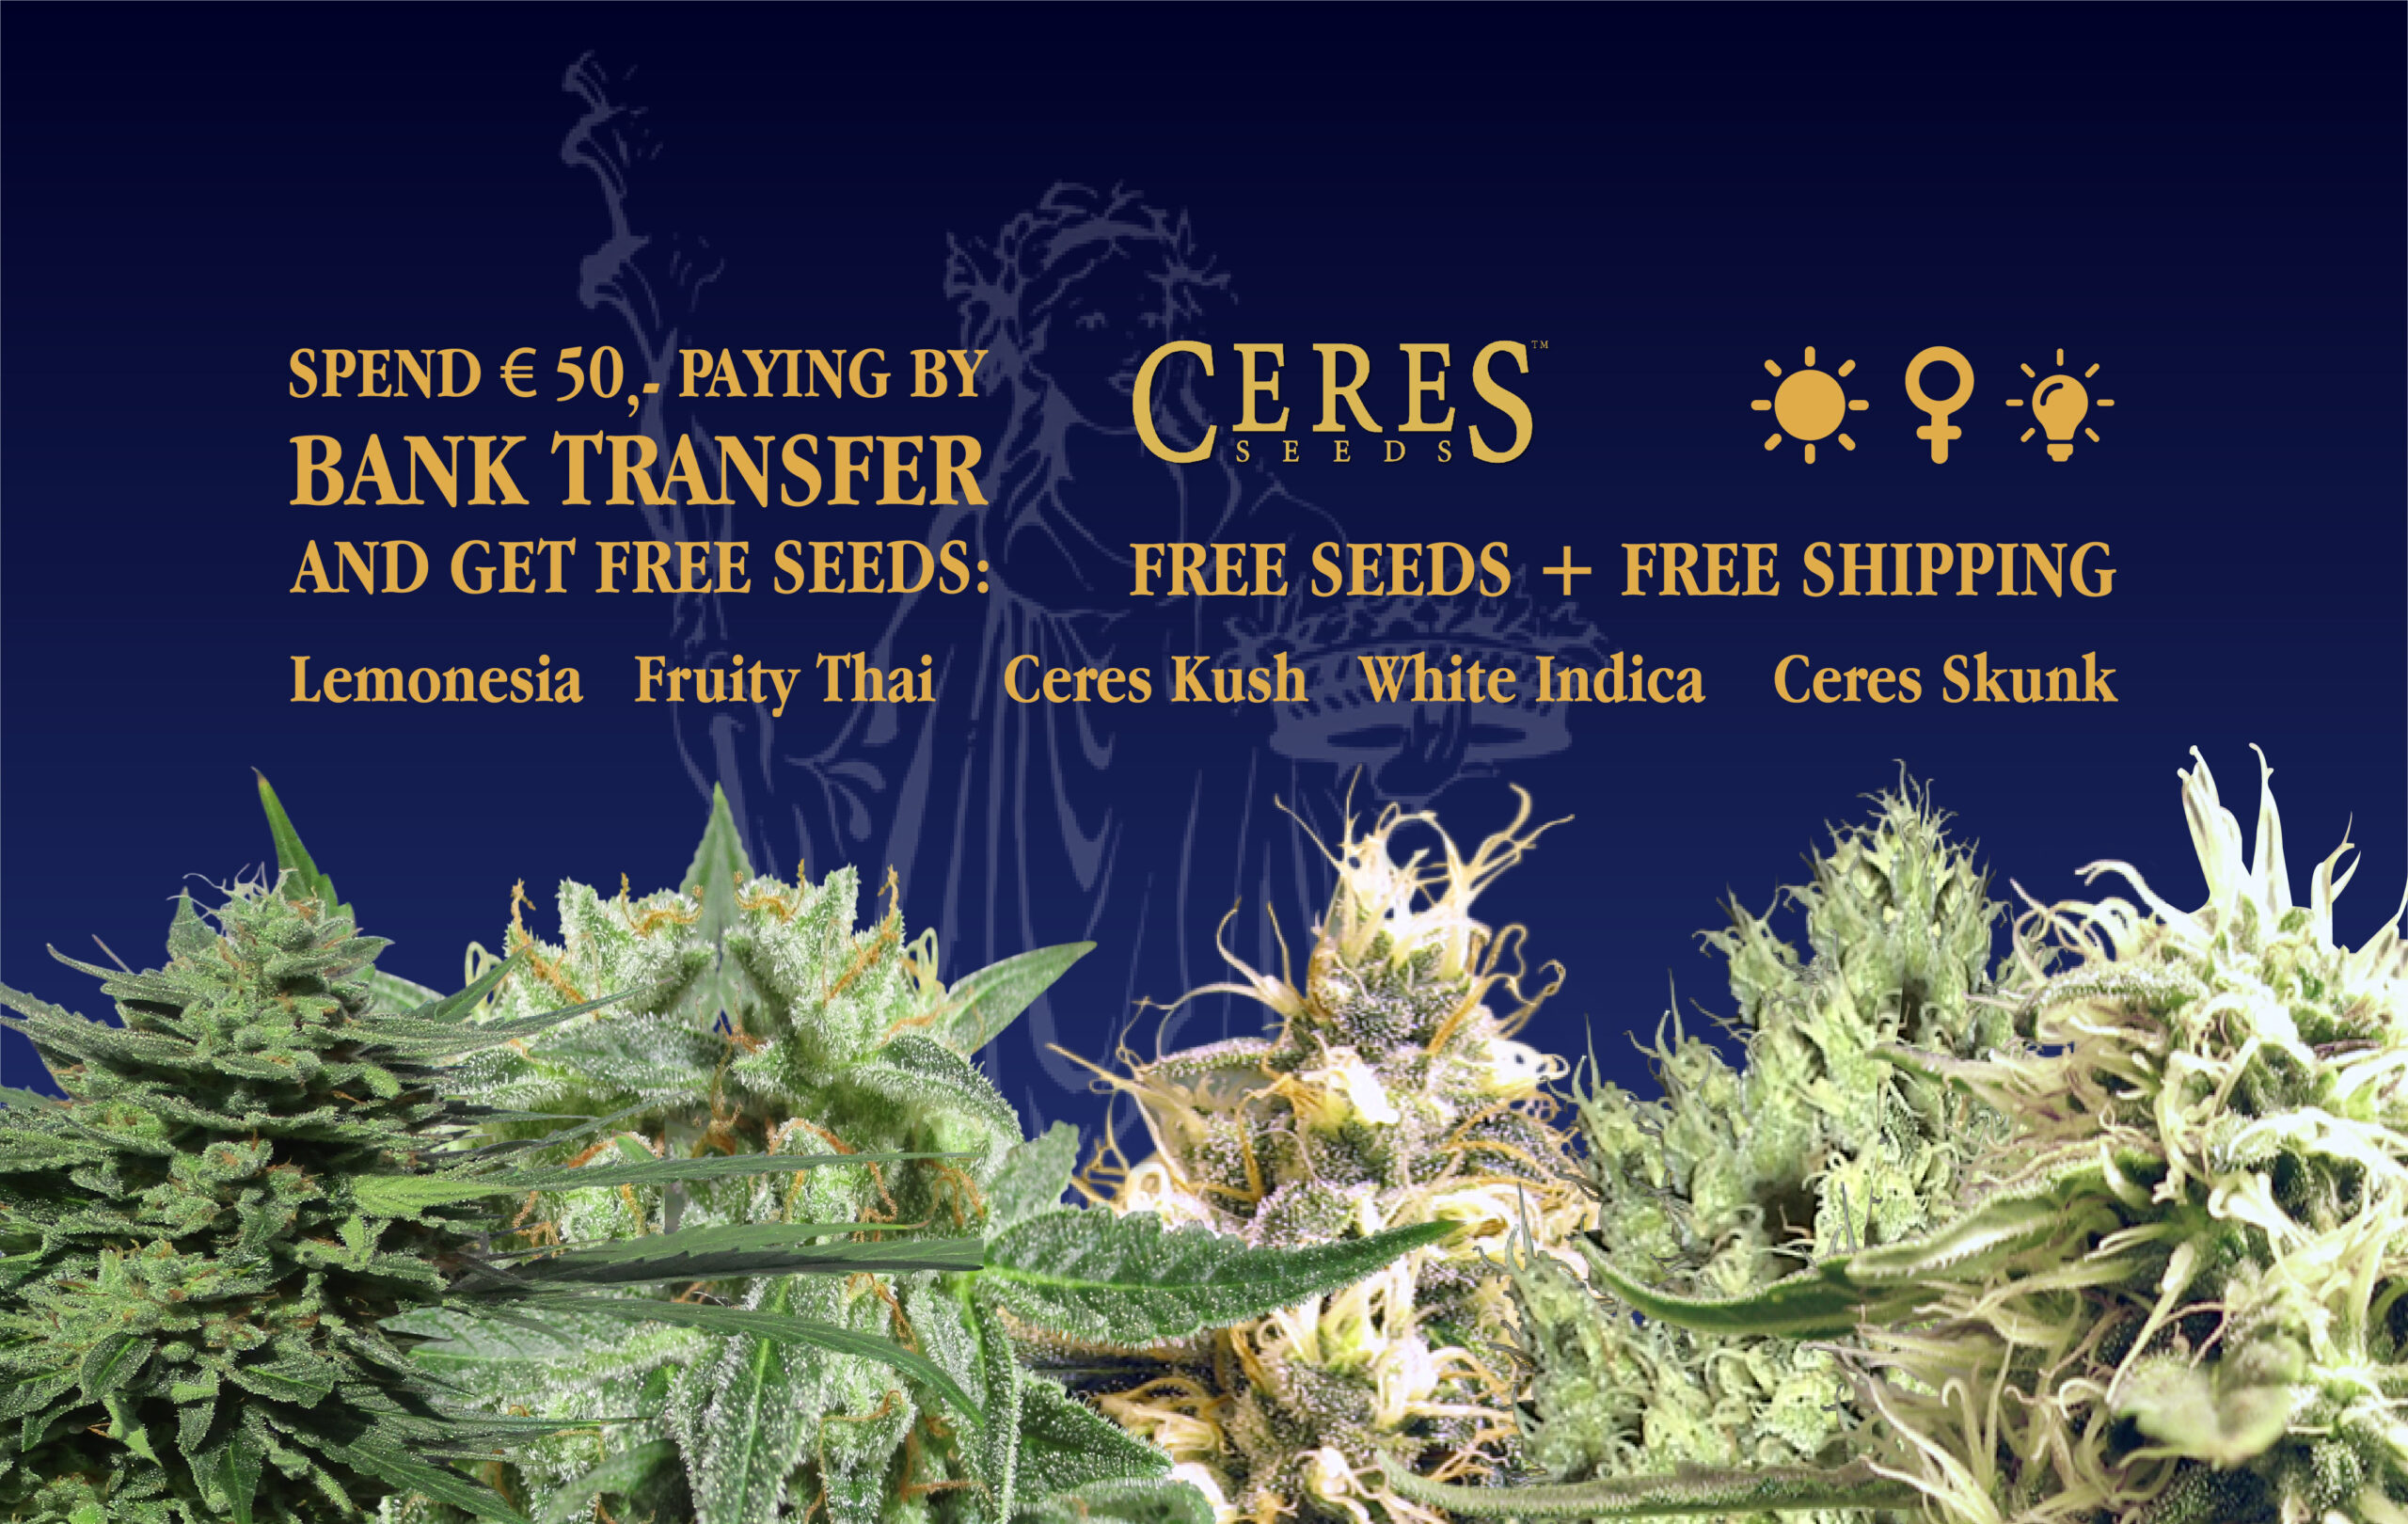 Ceres Seeds Amsterdam - Free seeds and shipping by spending 50 euro!